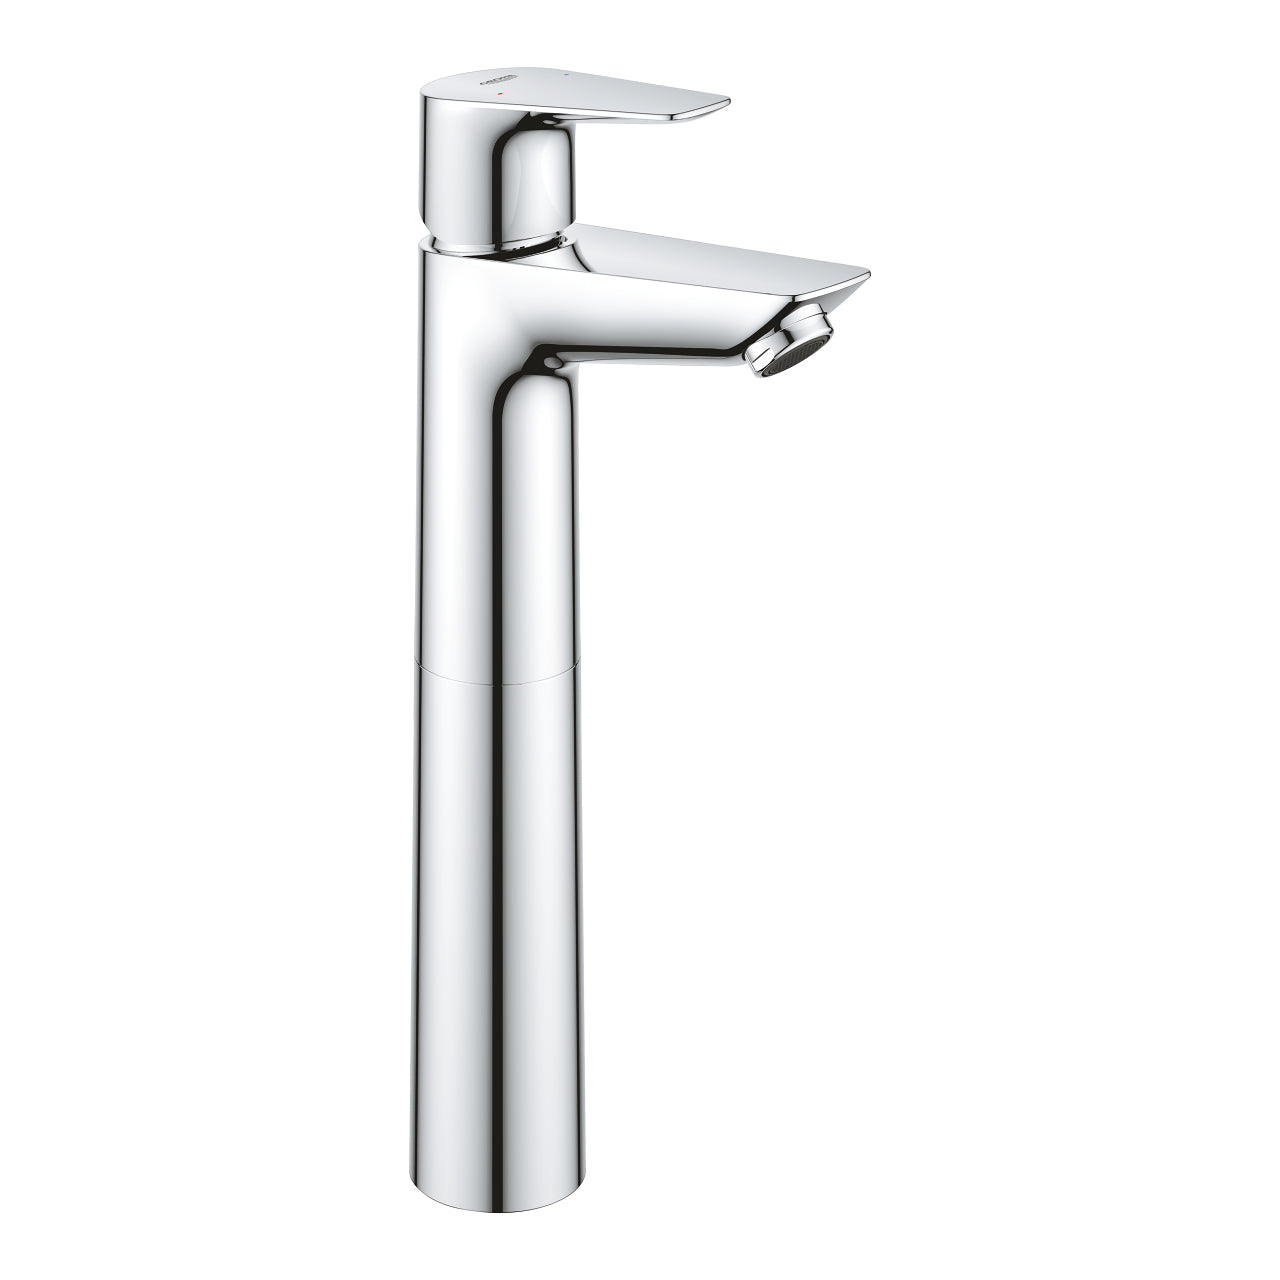 Grohe Bauedge Single lever Basin Mixer 1 / 2 Inch Xl Size